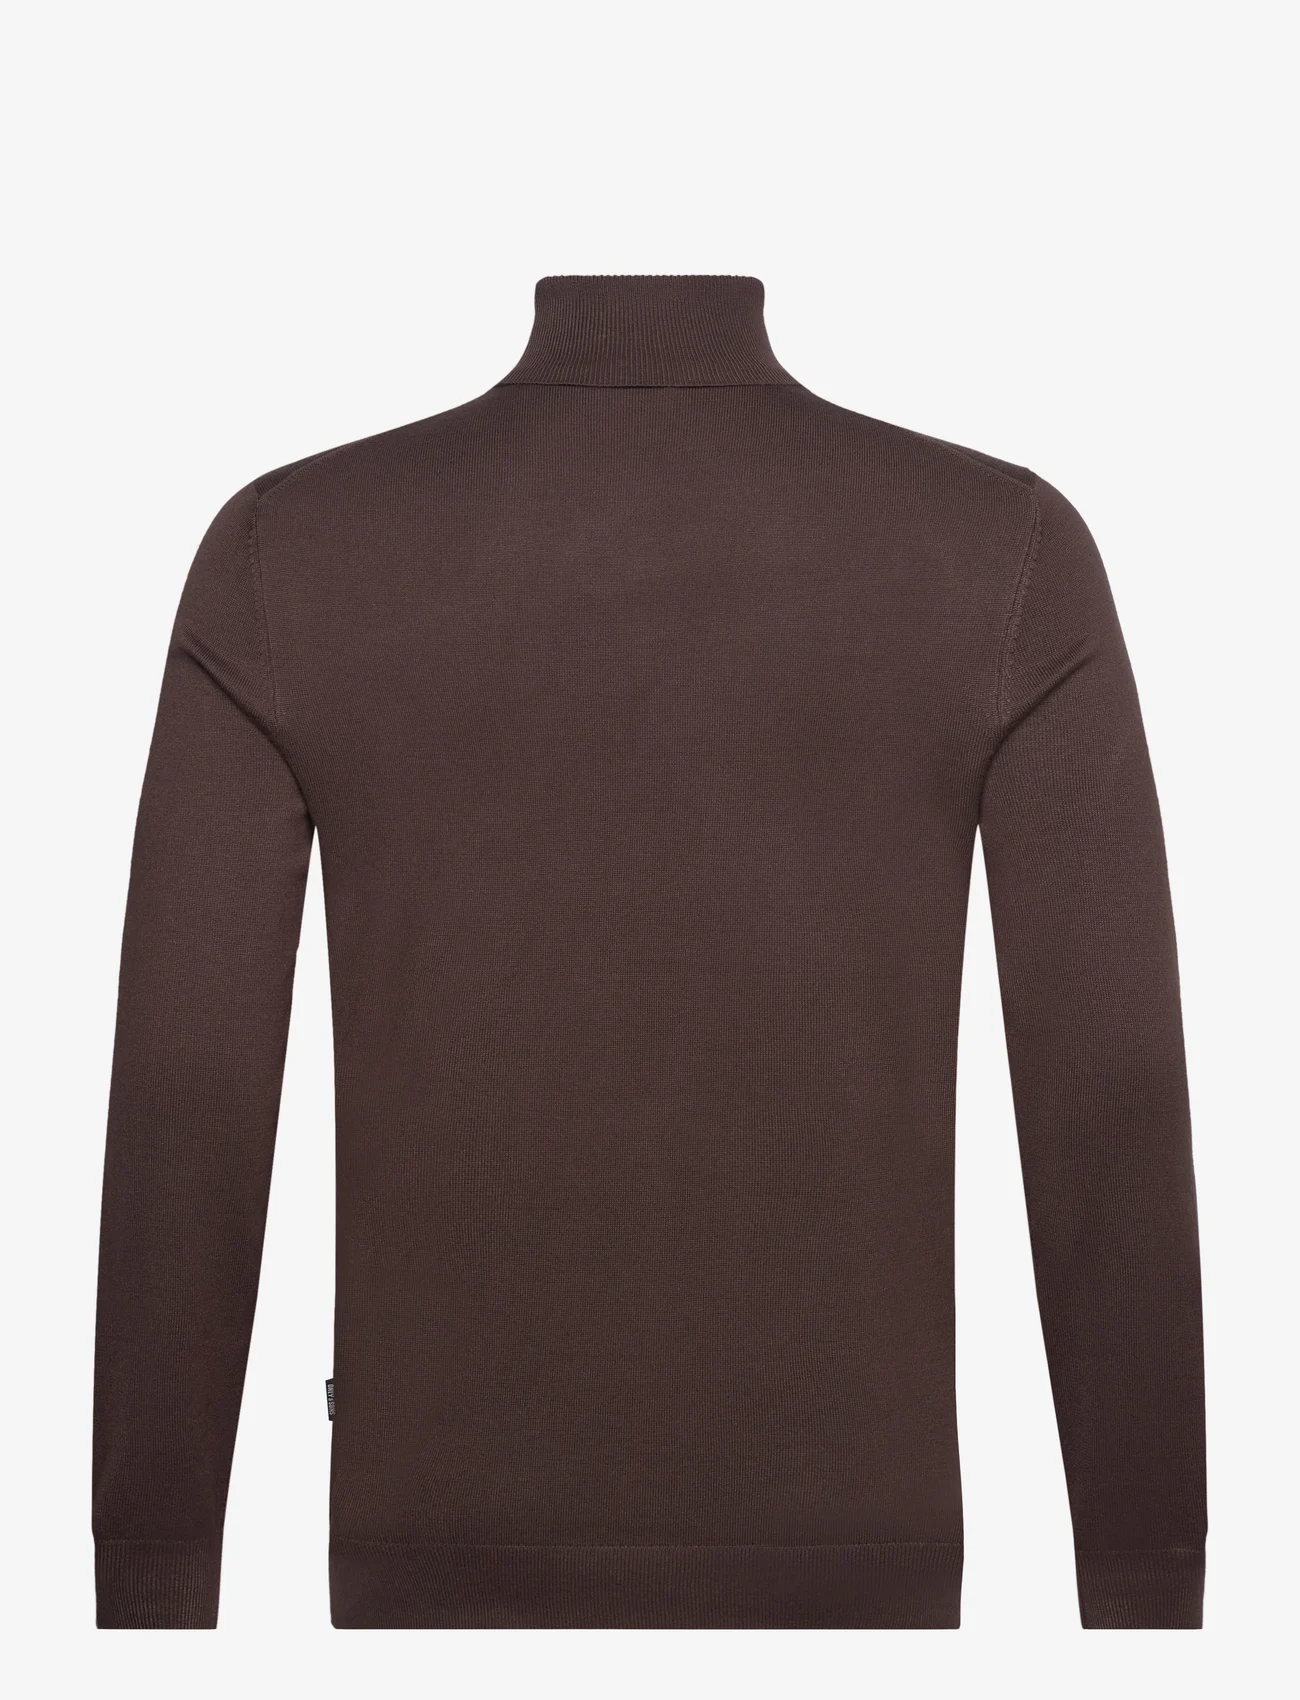 ONLY & SONS - ONSWYLER LIFE ROLL NECK KNIT - mažiausios kainos - hot fudge - 1